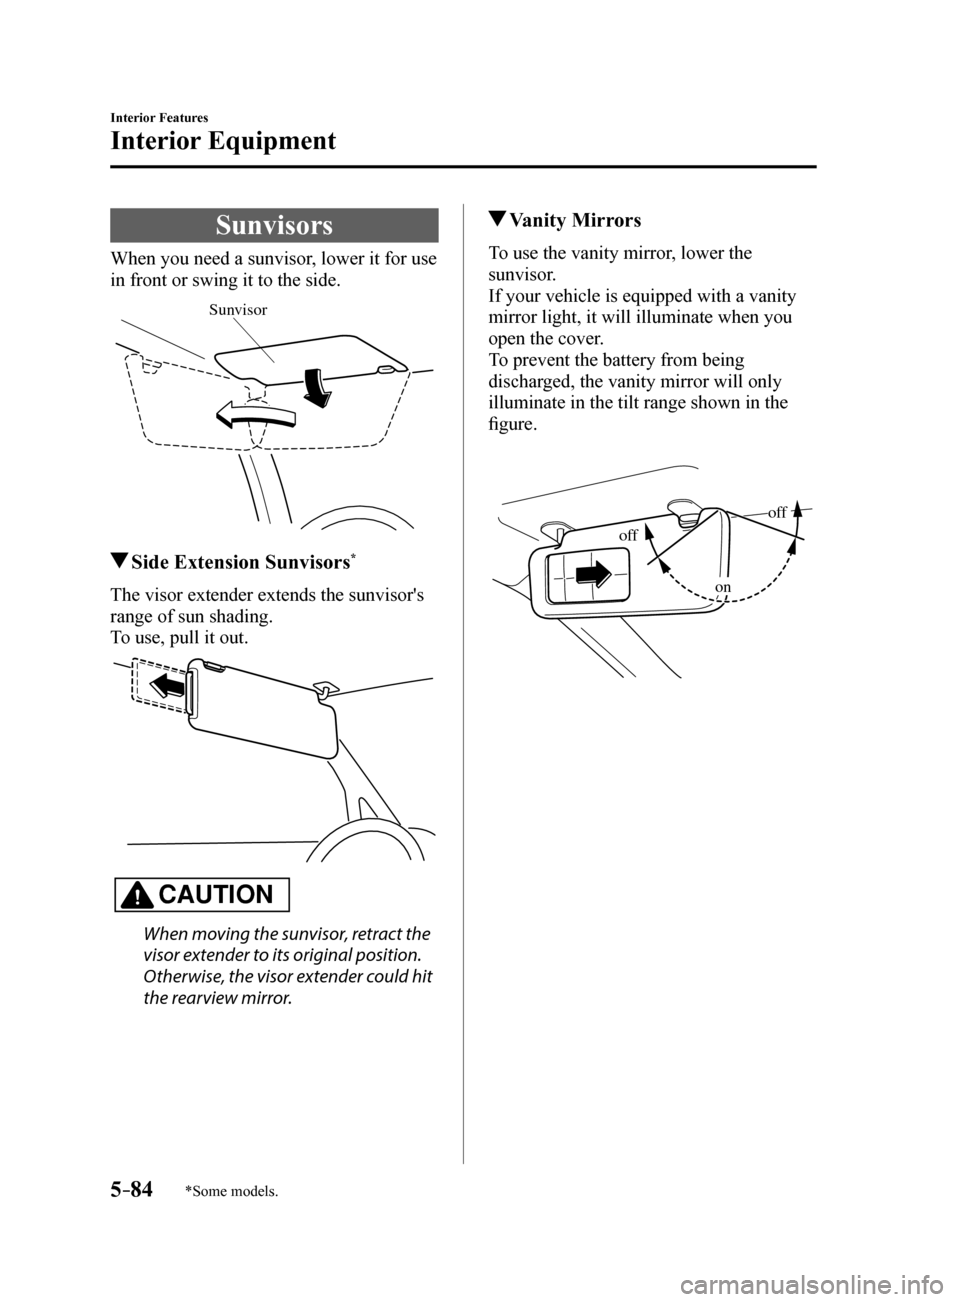 MAZDA MODEL 6 2017  Owners Manual (in English) 5–84
Interior Features
Interior Equipment
*Some models.
Sunvisors
When you need a sunvisor, lower it for use 
in front or swing it to the side.
Sunvisor
 Side Extension Sunvisors*
The visor extender